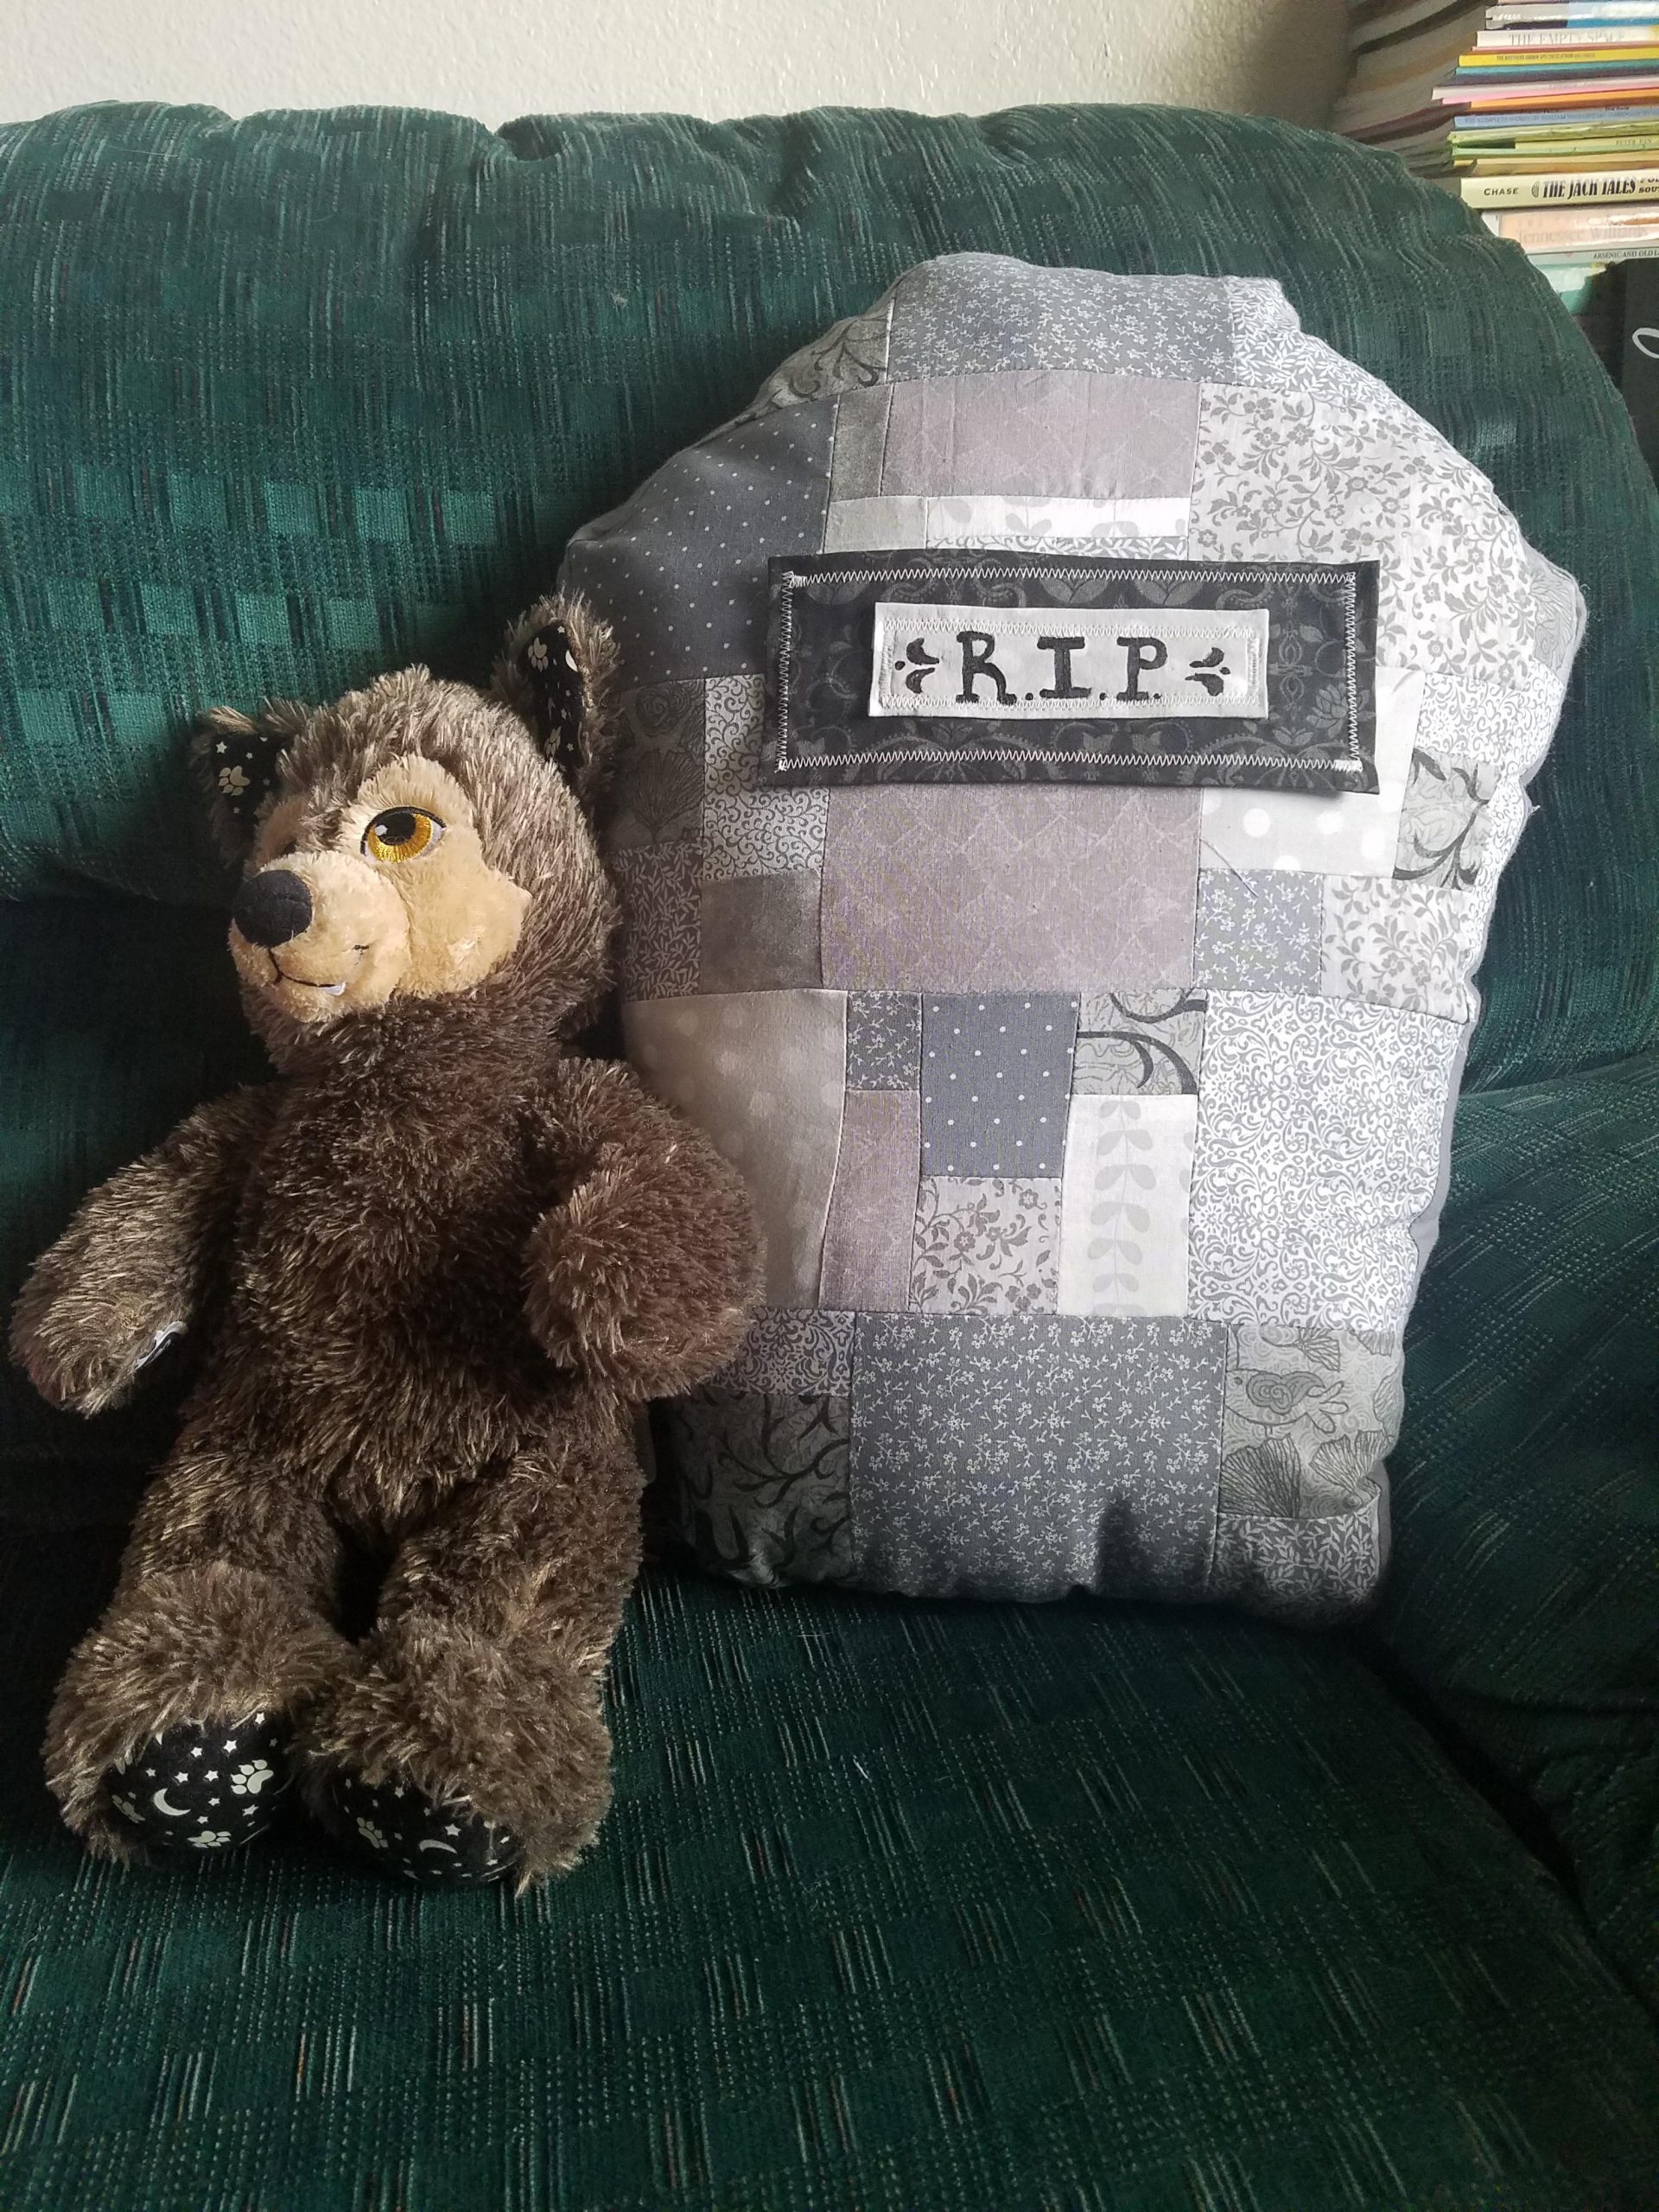 2r0agxknadm51 scaled - My newest creation: tombstone patchwork pillow :) and my adorable stuffie Werewoofle (I did not make him lol) - hobbies, crafts